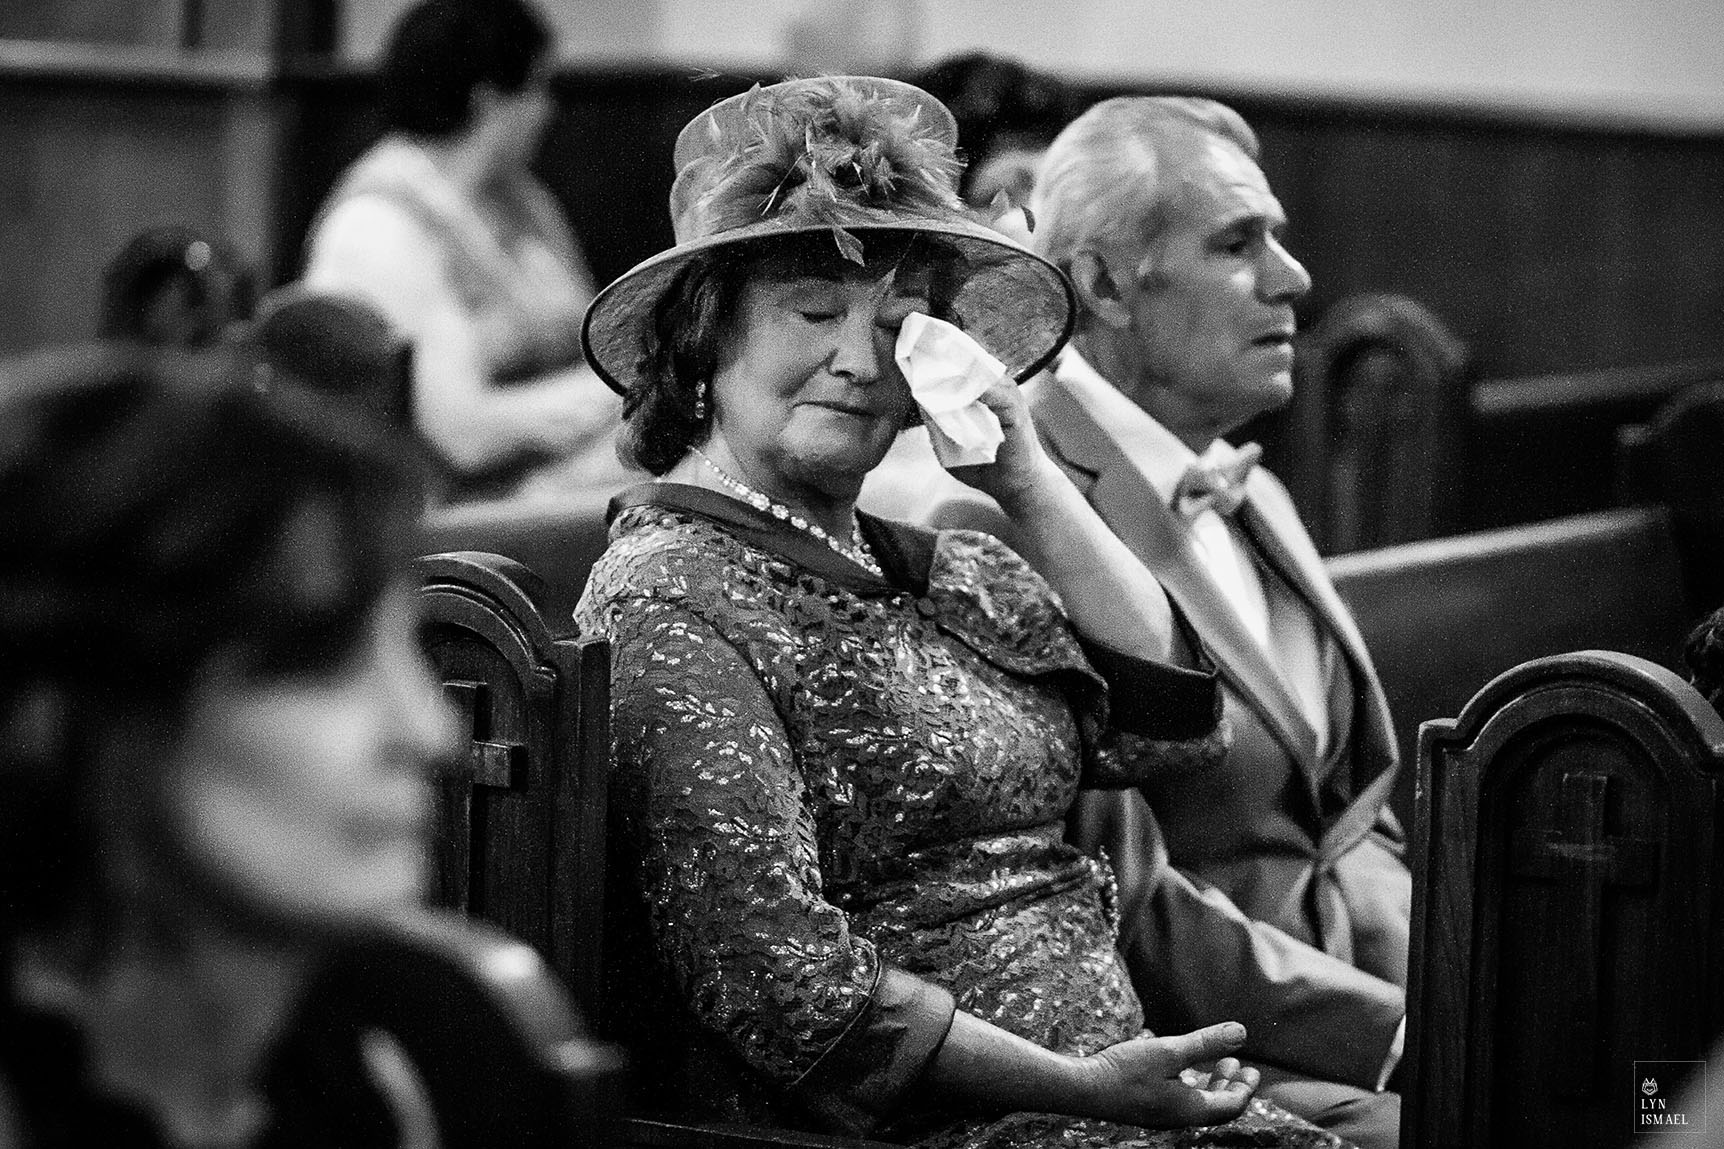 Mother of the bride becomes emotional as she watches her daughter marry at a wedding ceremony in Cambridge, Ontario.